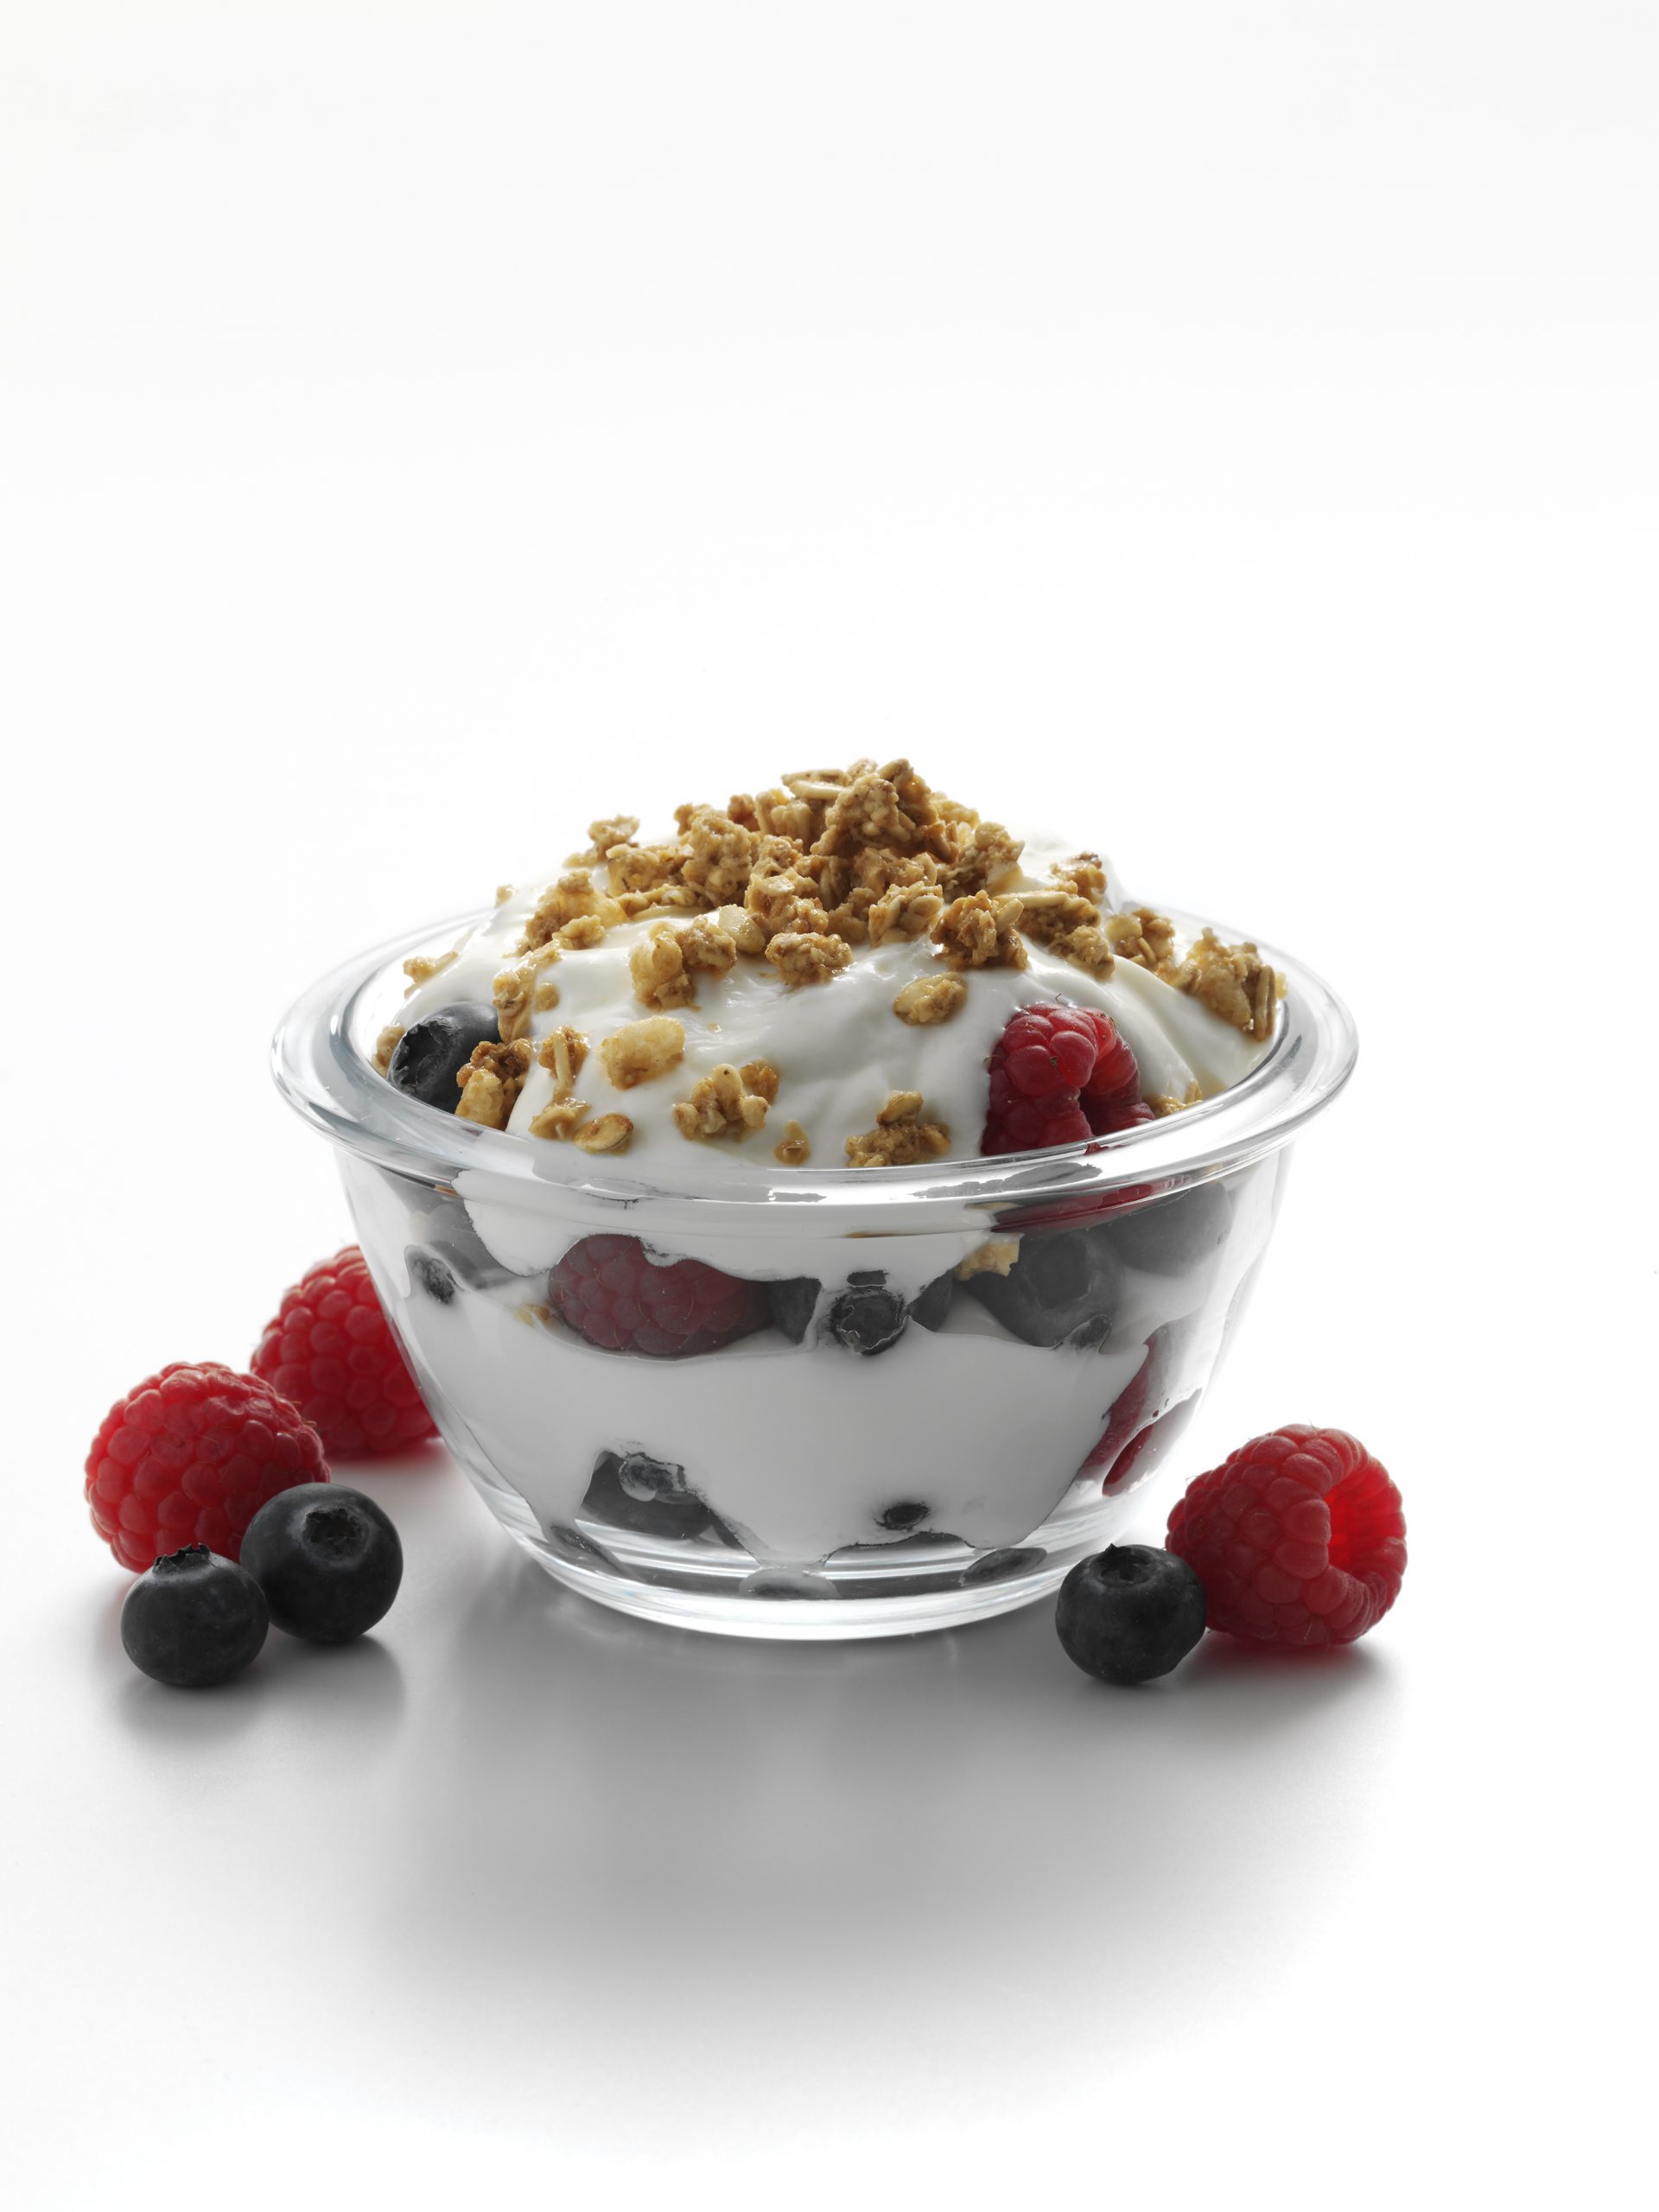 Tate & Lyle expands tapioca-based starches range